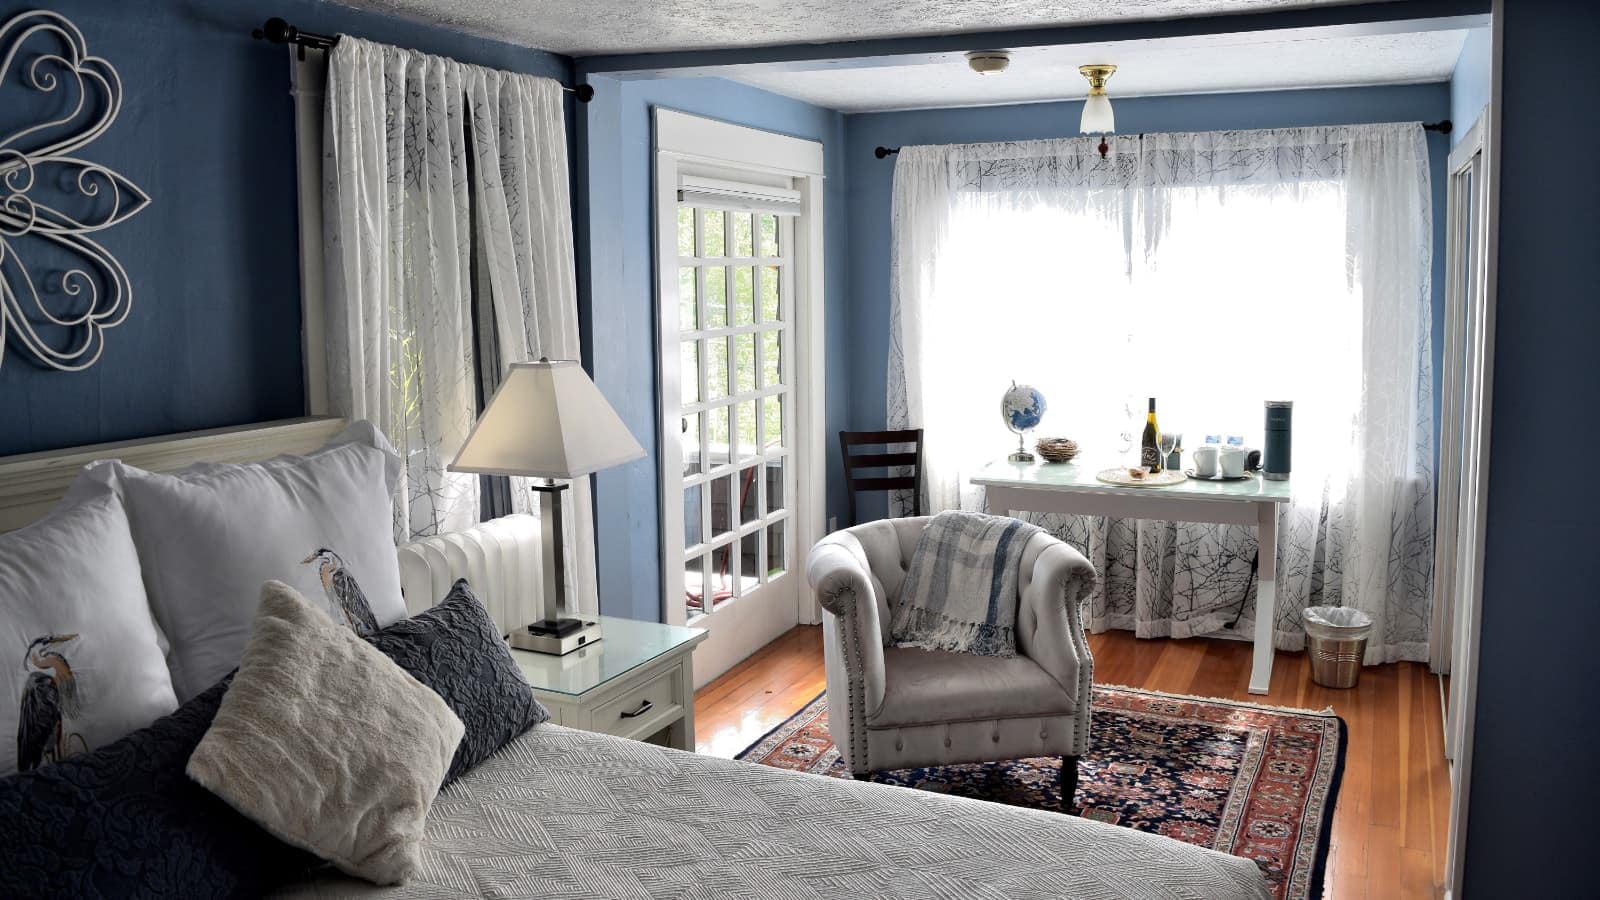 Bedroom with blue walls, hardwood flooring, white headboard, white bedding, antique upholstered armchair, and large windows